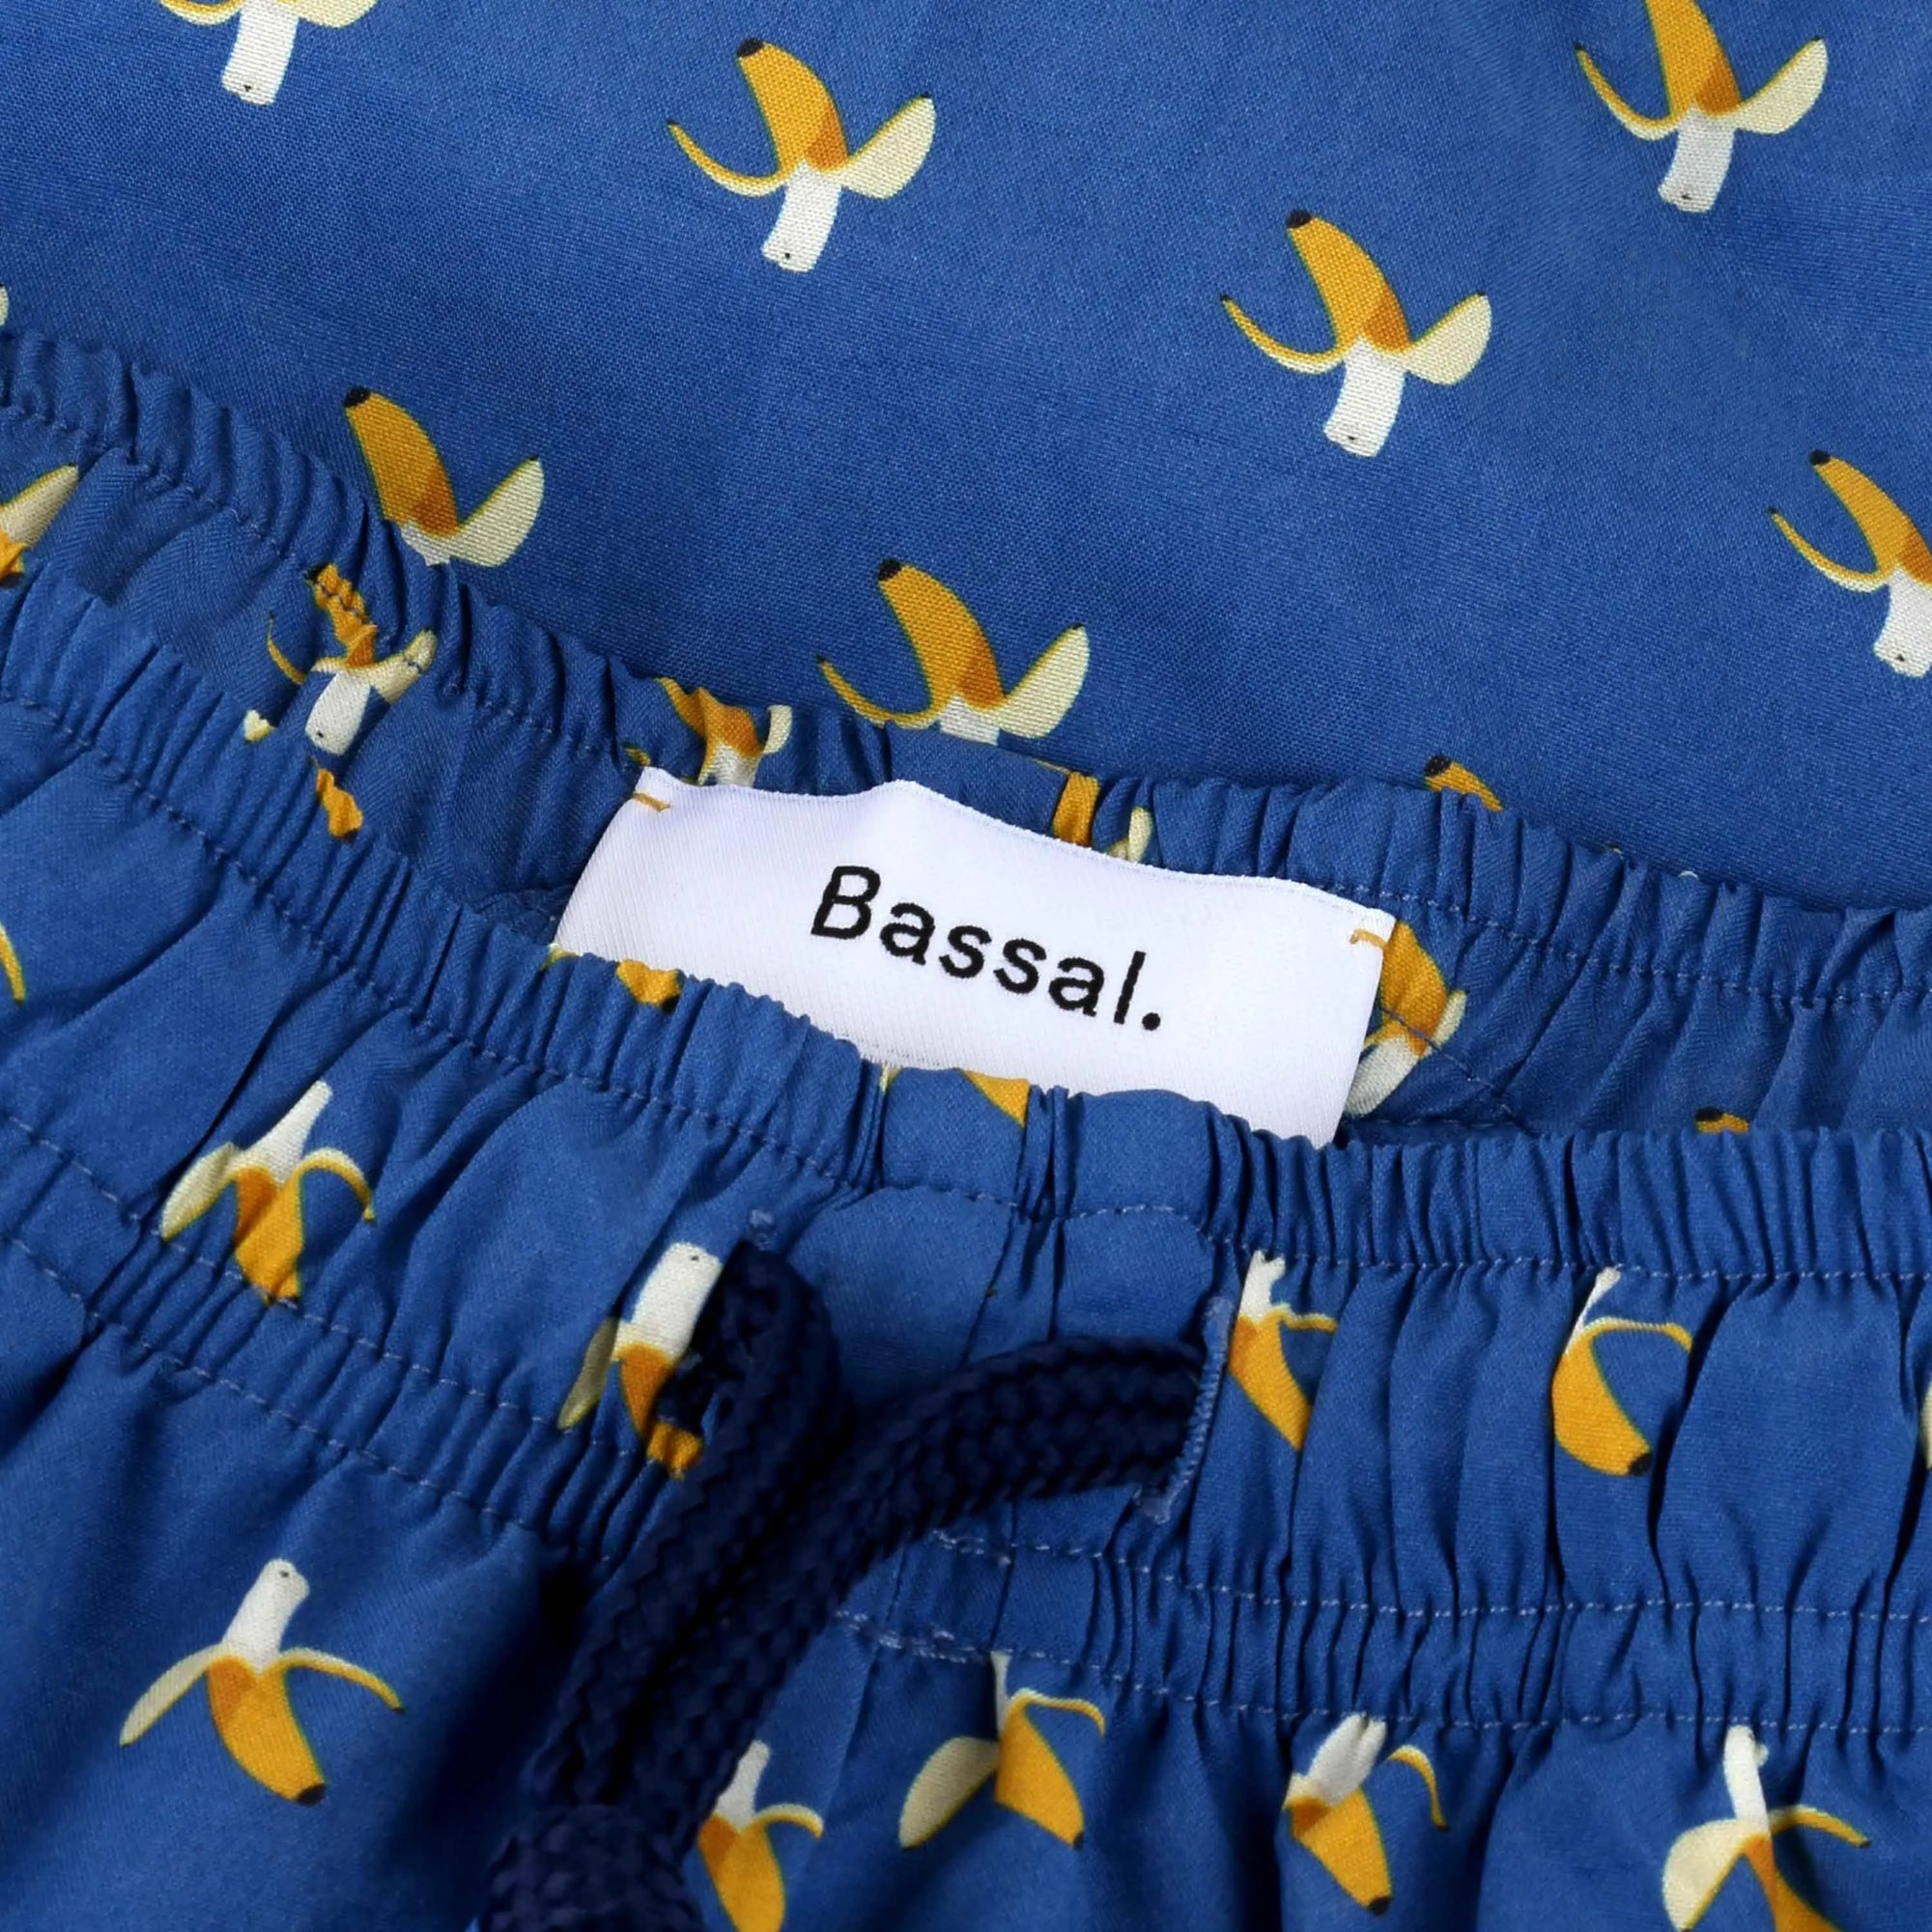 A pair of blue shorts with a banana pattern, neatly folded in a white box. The box lid, partially visible, has "Bassal." written on it. Also inside the box are two labeled packets, one possibly containing a product tag and the other in blue packaging. This delightful item, Bananas Swimwear by Bassal., is available at Bassalstore in Barcelona.